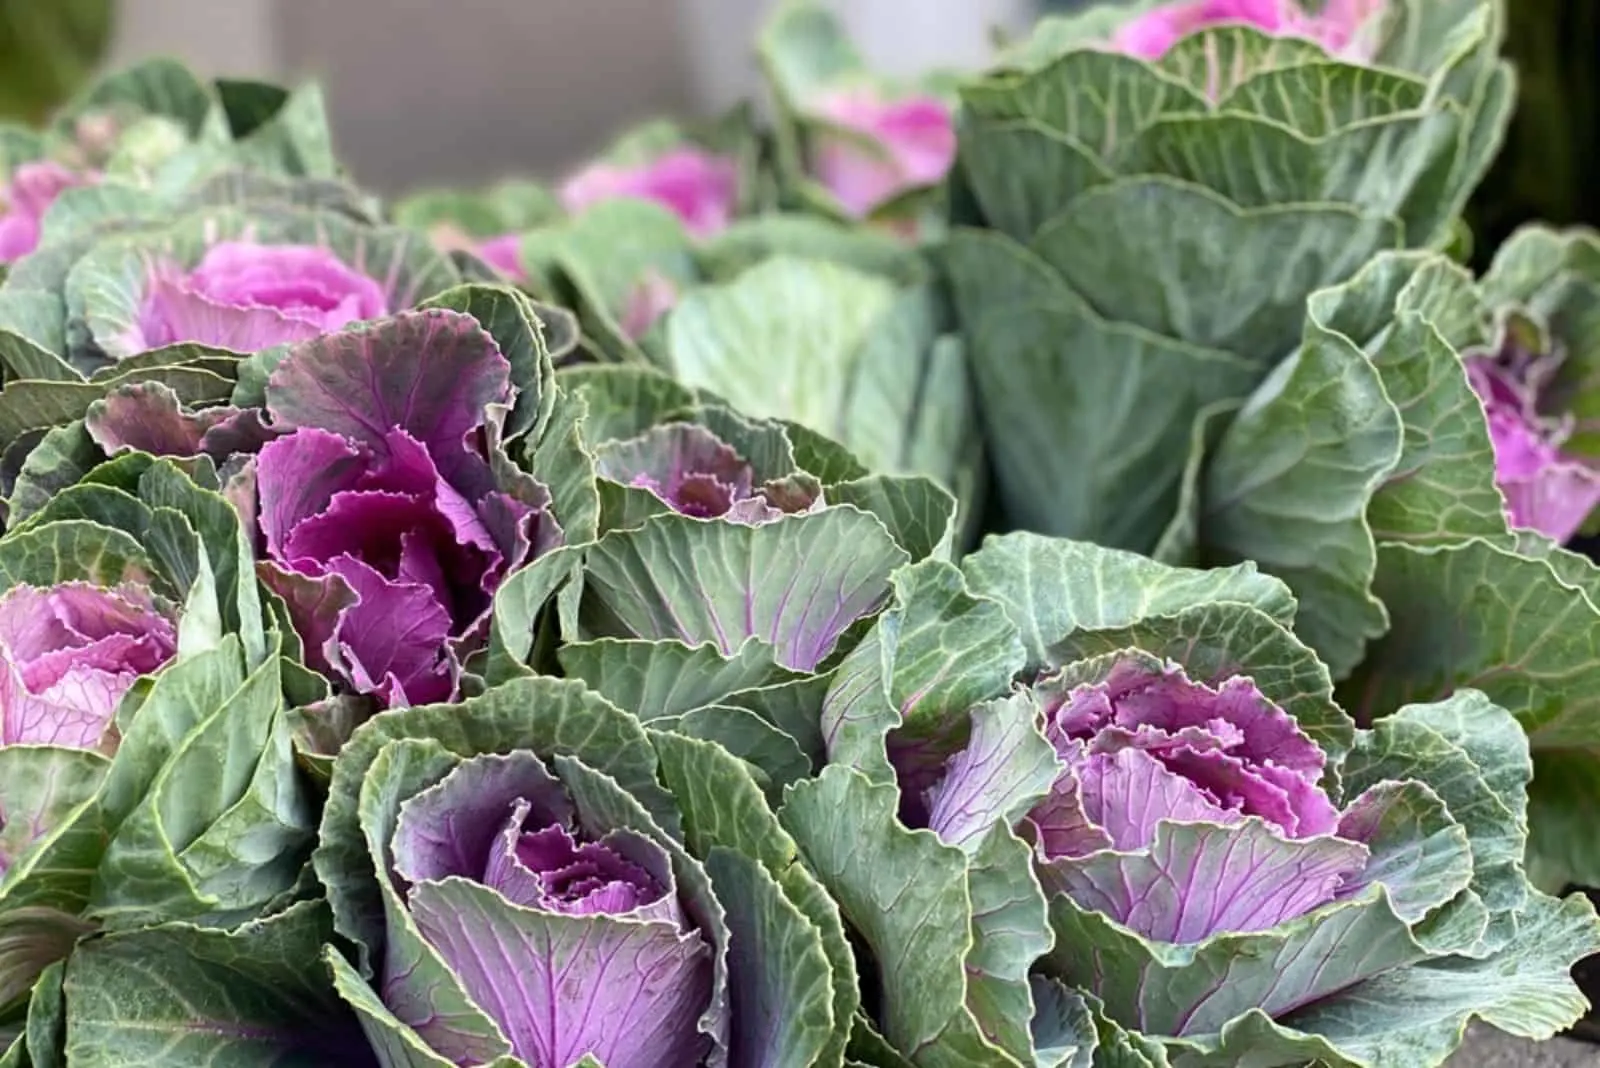 Ornamental brassica cabbage with green purple leaves